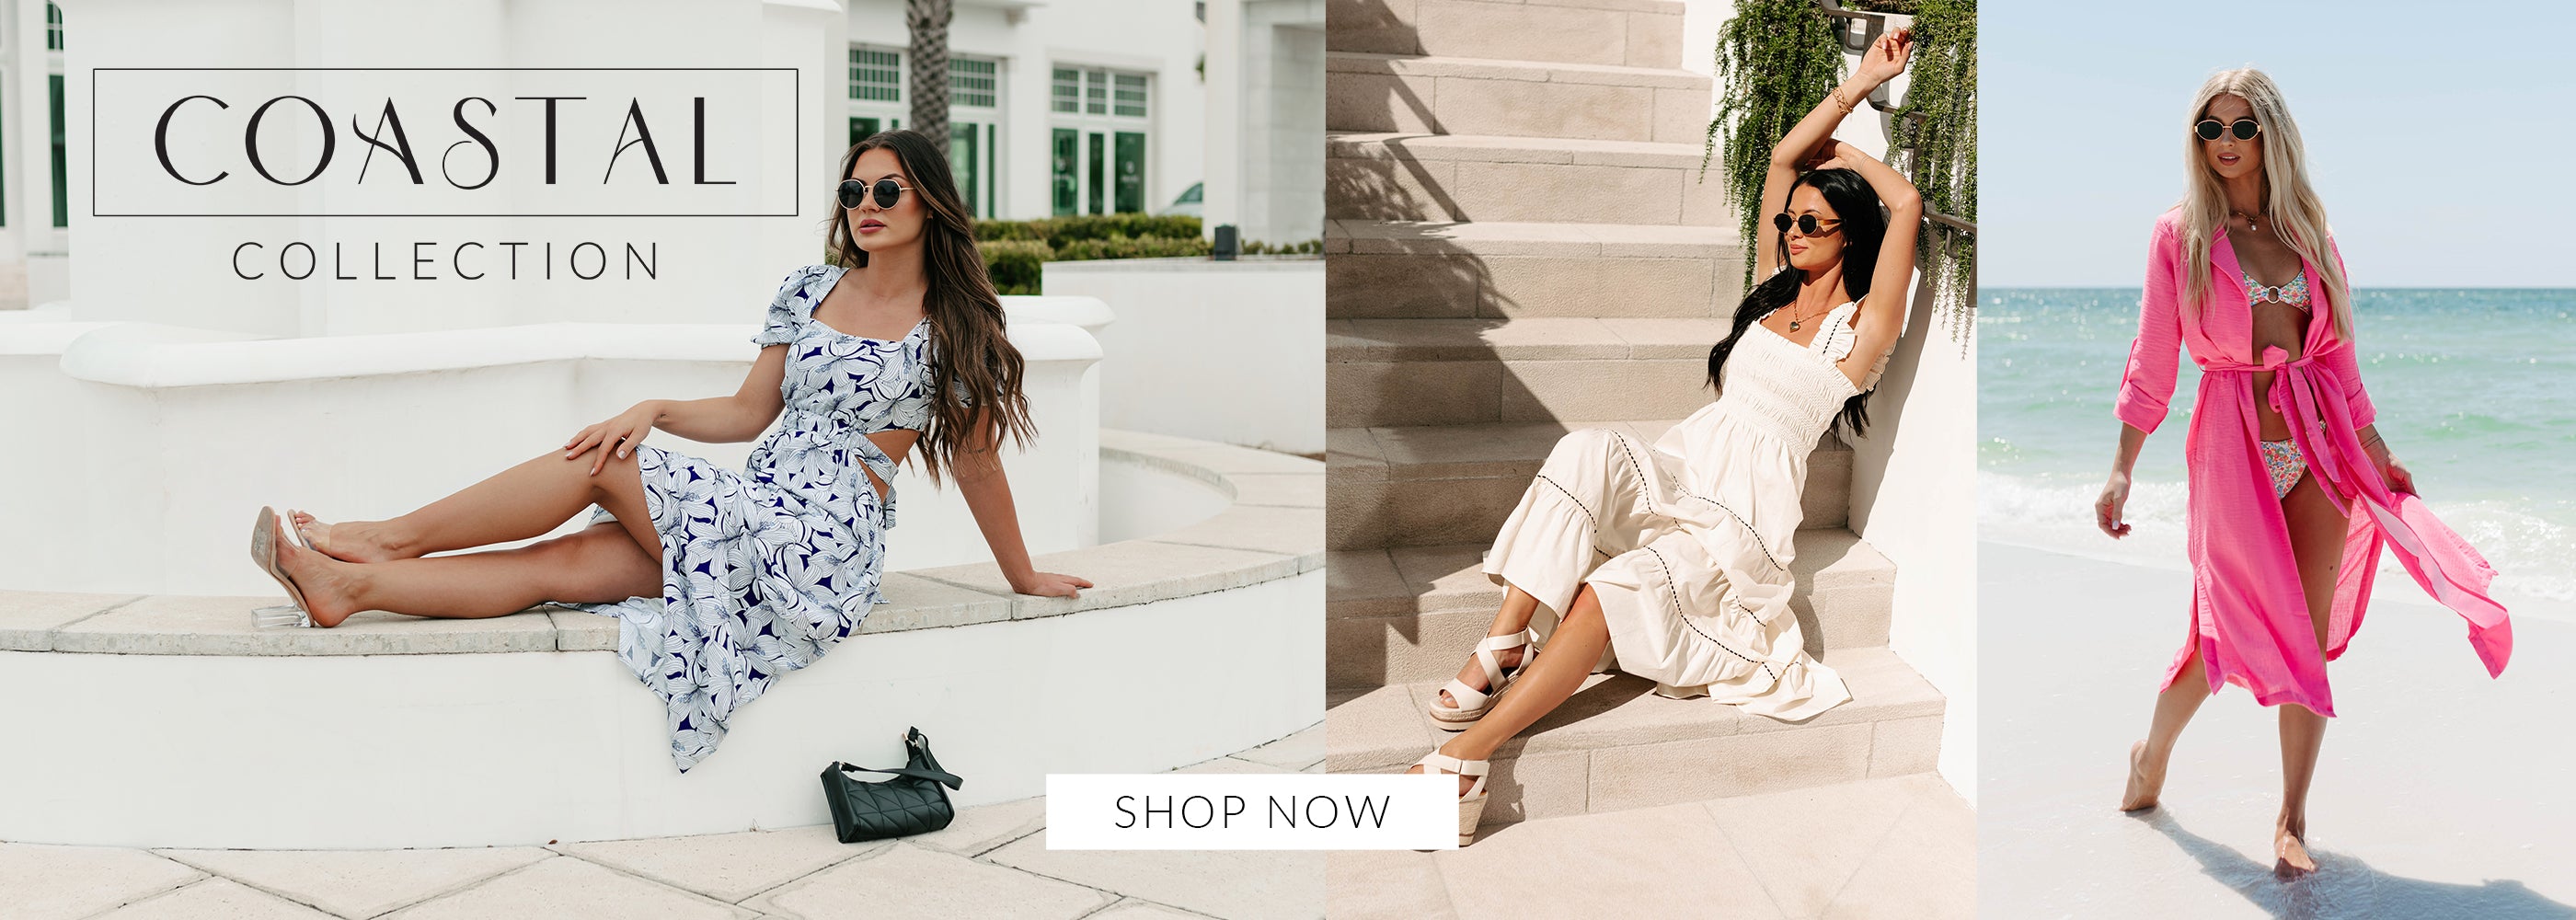 Collage of models wearing summer dresses, swim covers and more. Headline says "Coastal Collection" Call to action says Shop Now and links to the Coastal Collection.